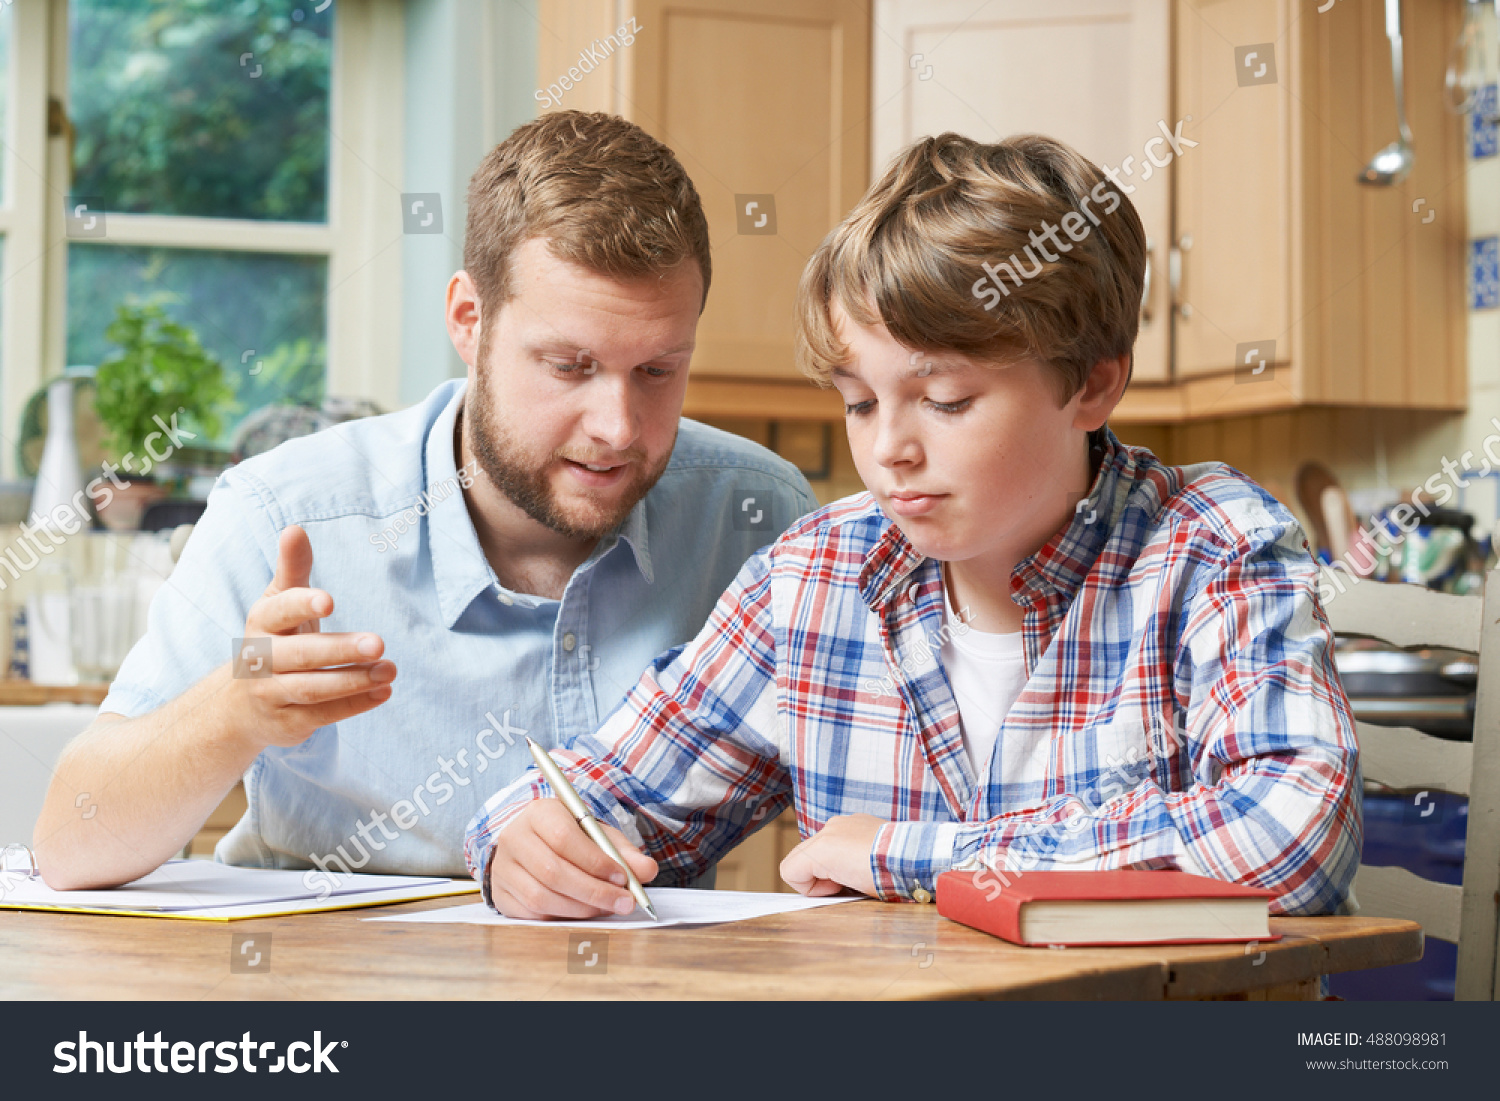 Male Home Tutor Helping Boy With Studies #488098981